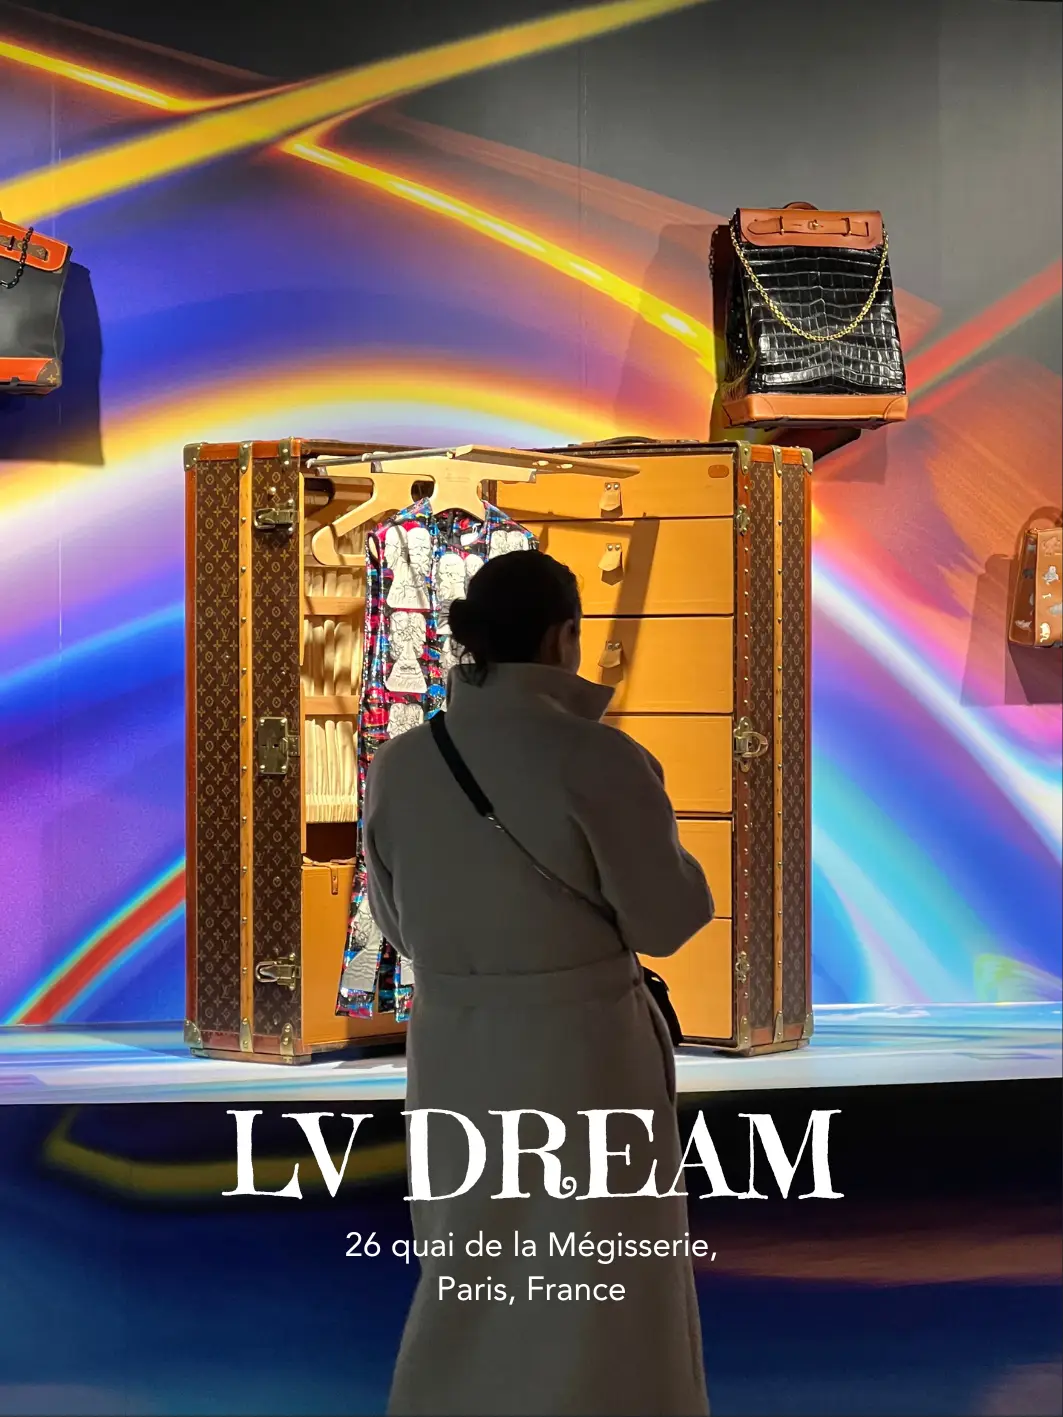 Louis Vuitton has an expo in Paris : LV Dream. There is some nice